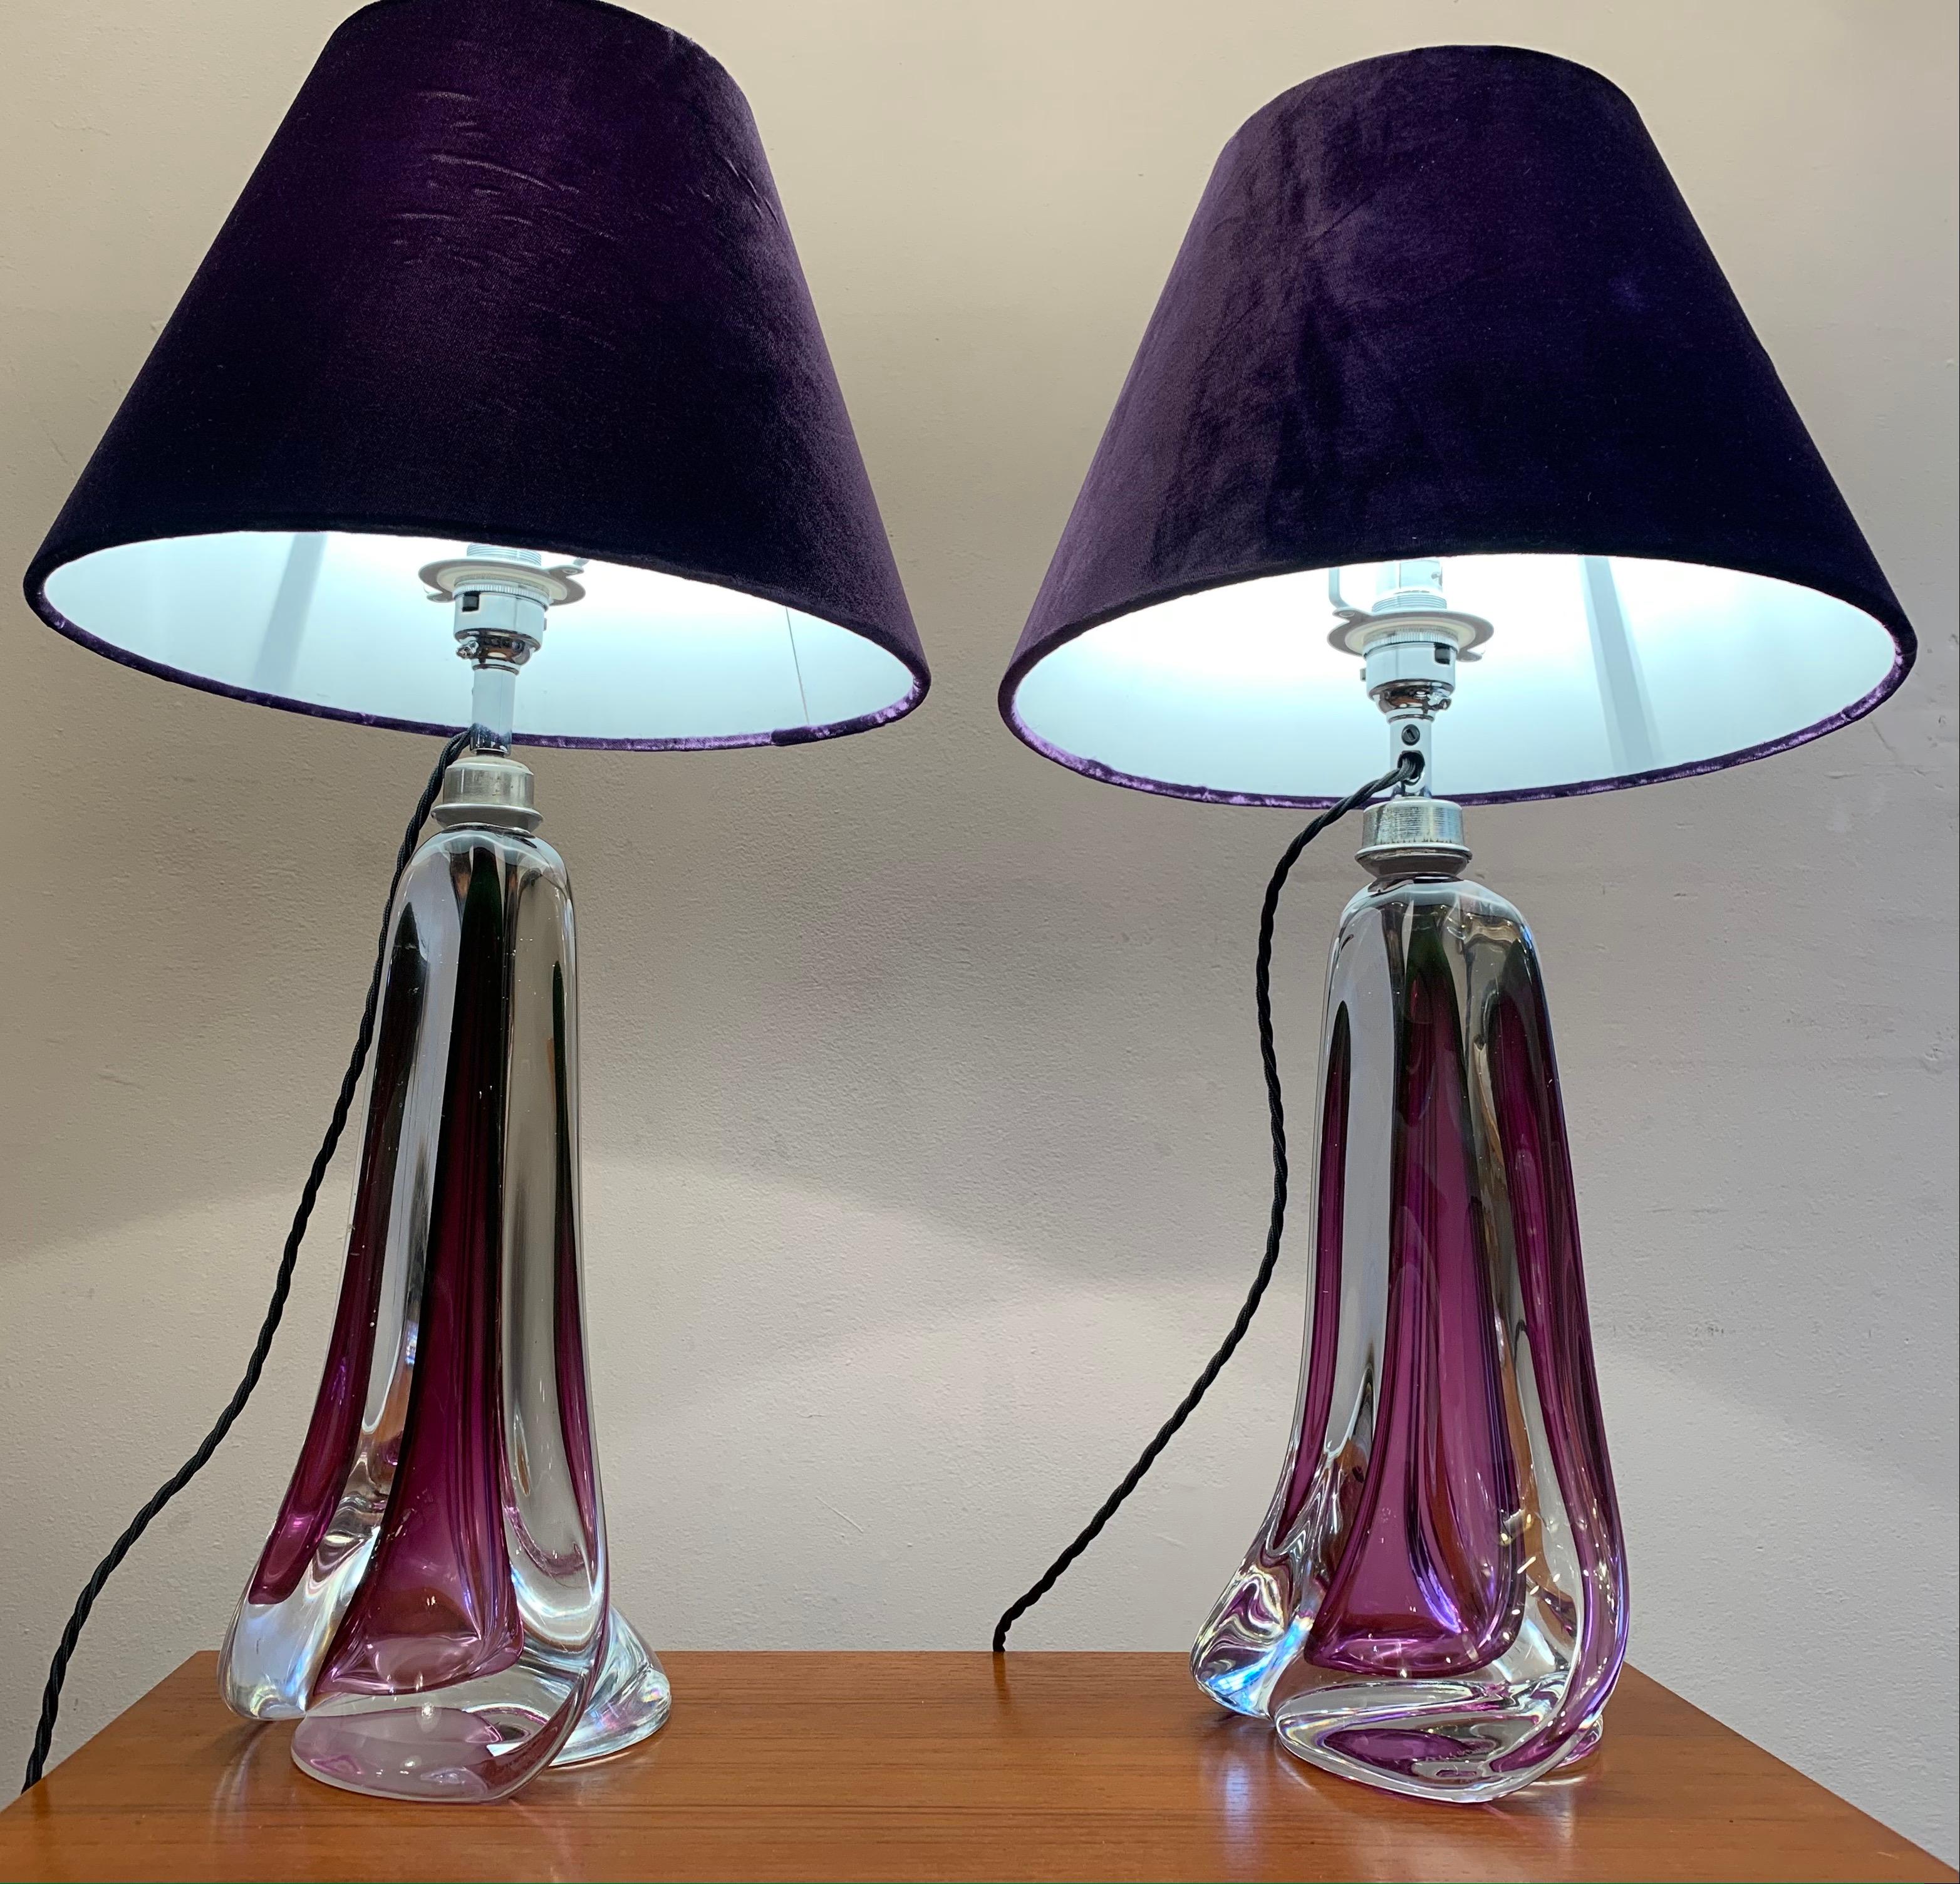 Pair of 1950s Val Saint Lambert purple and clear glass crystal lamp bases of tapering geometric form with the new chrome mounted light fittings. handmade in heavy lead crystal glass in Belgium which makes every one unique. 

The Val Saint Lambert